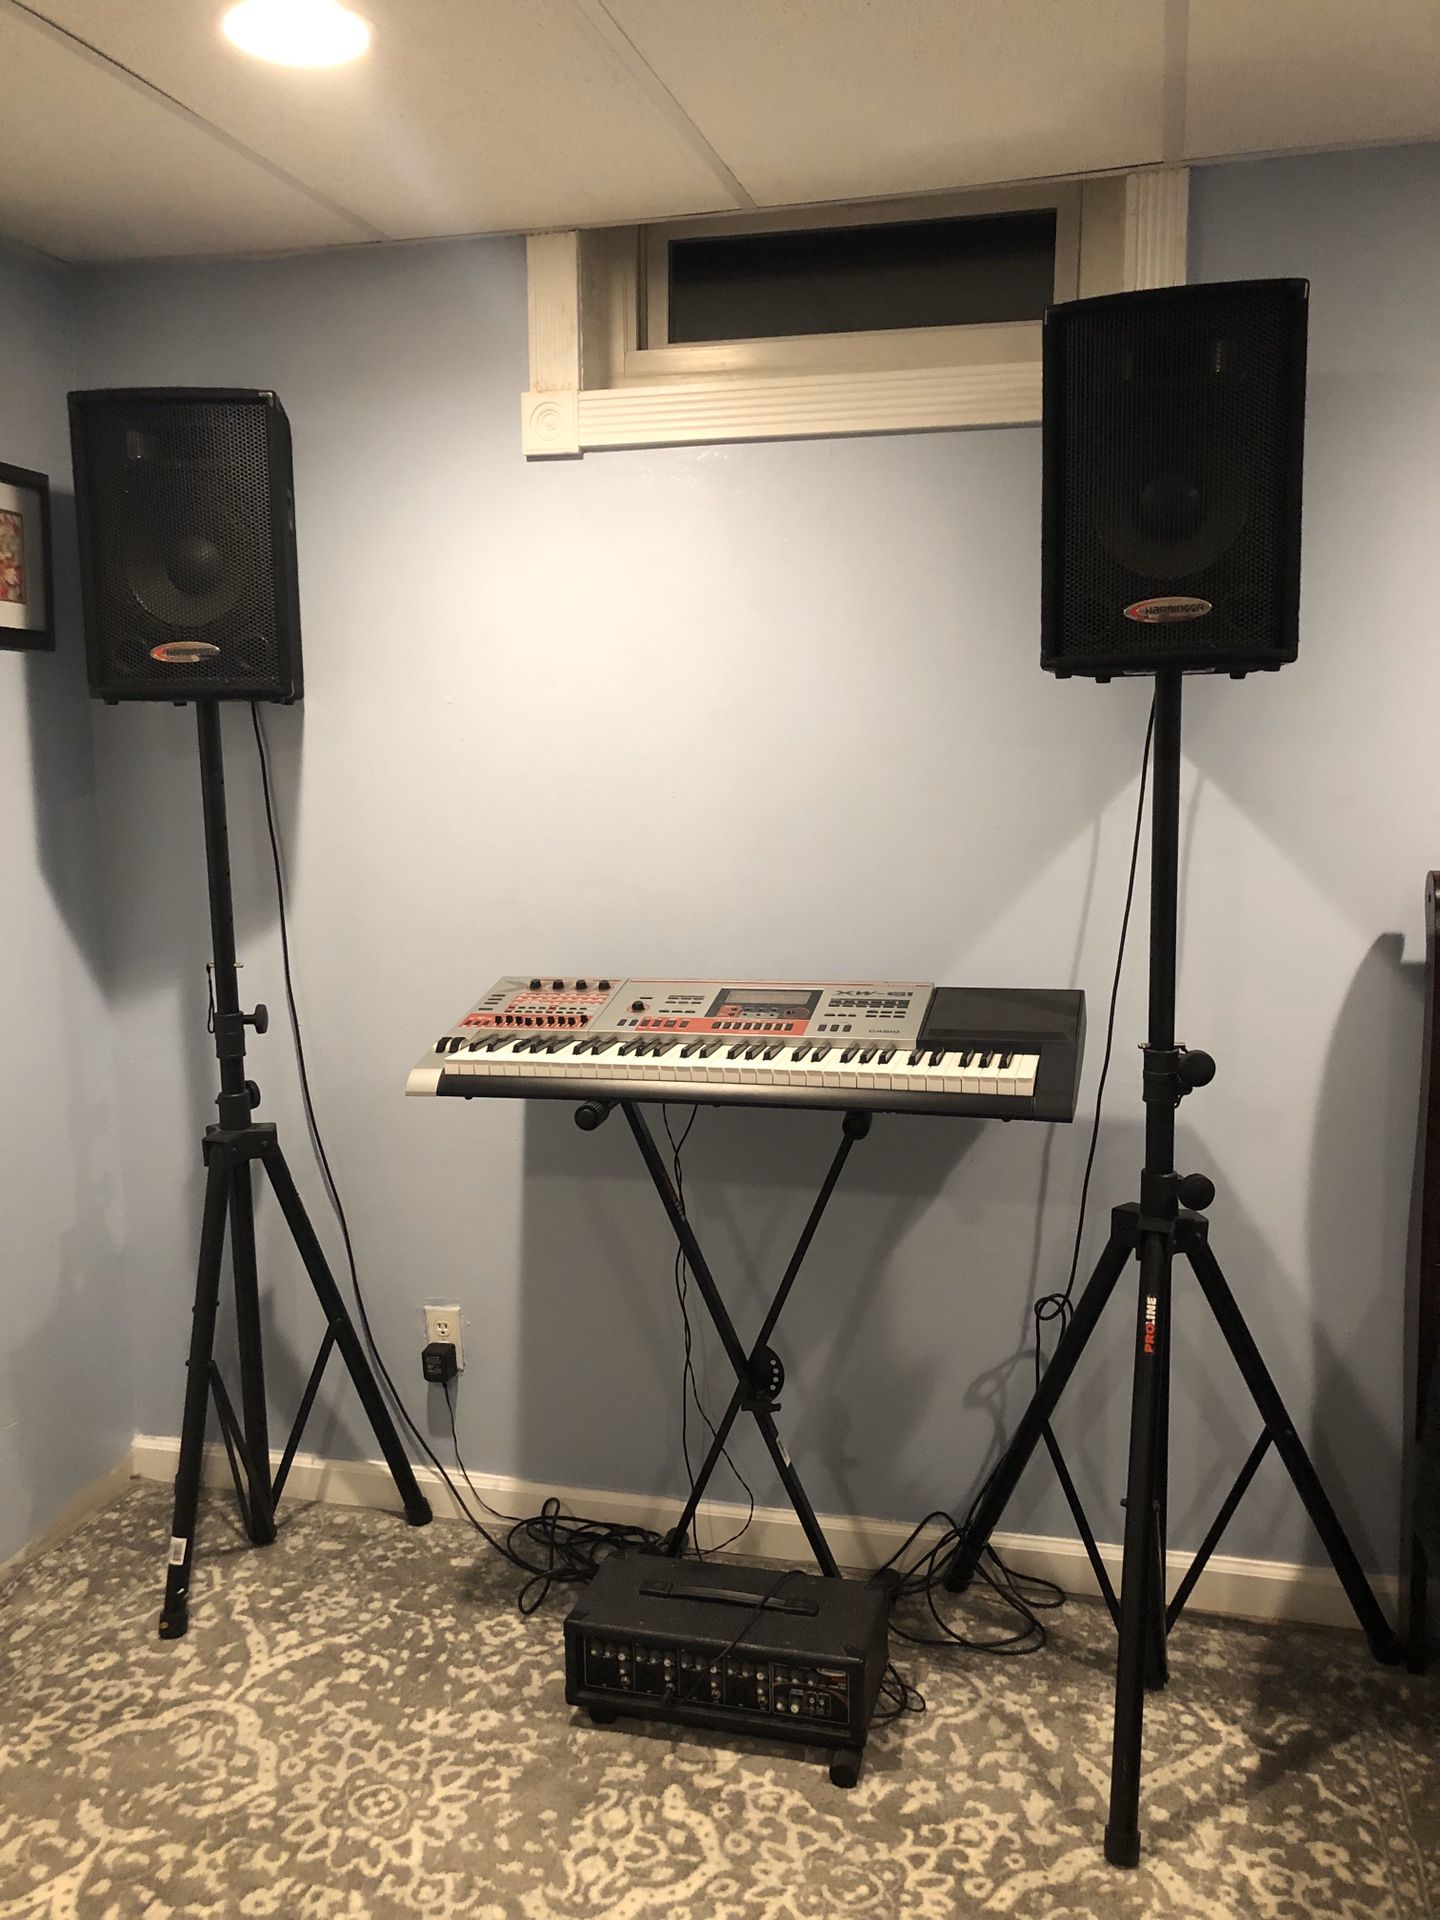 Casio keyboard with amp and 2 speakers and speaker stands